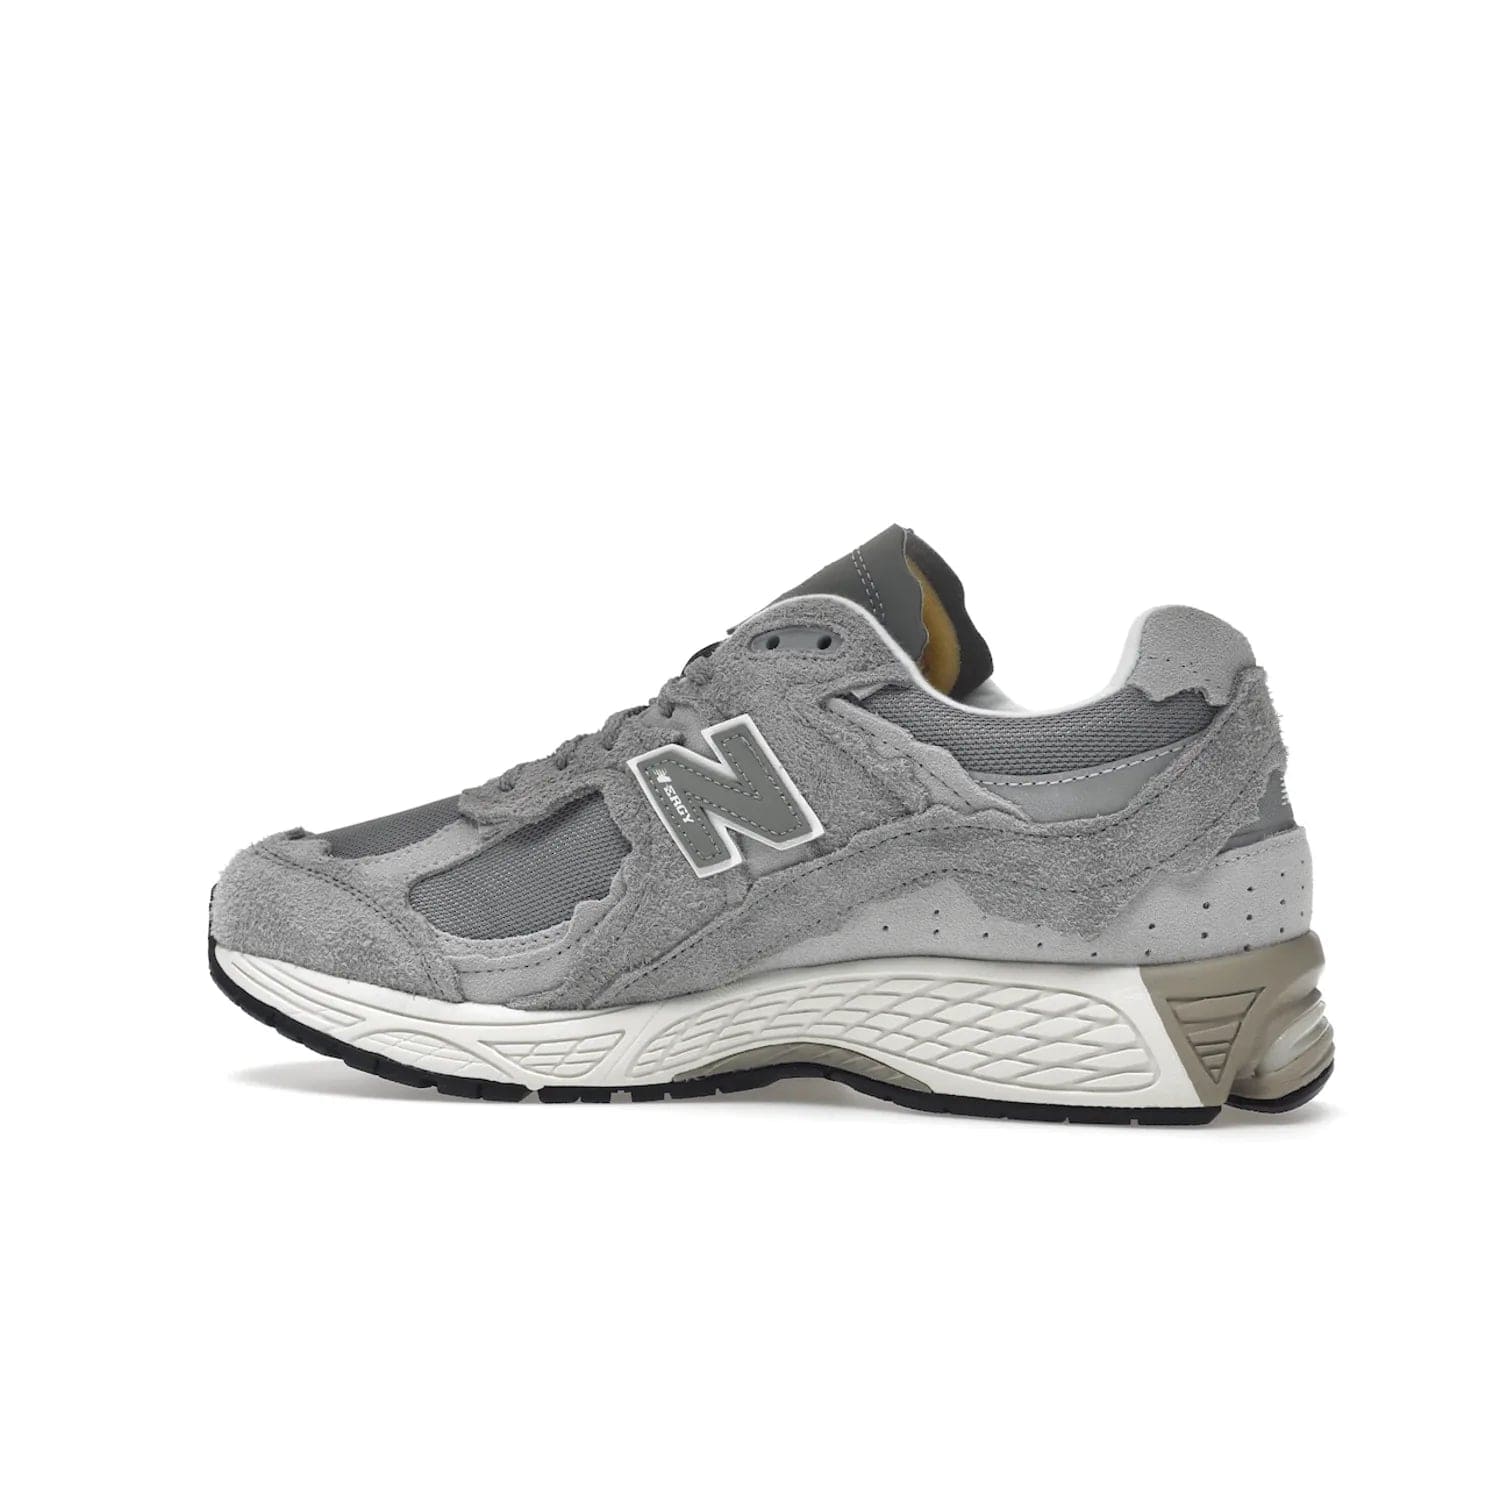 New Balance 2002R Protection Pack Grey - Image 21 - Only at www.BallersClubKickz.com - The New Balance 2002R Protection Pack Grey provides superior protection and all-day comfort. It features a blend of synthetic and mesh materials, foam midsole, rubber outsole, and a toe cap and heel counter. Show off the classic "N" logo and "2002R" lettering. Get a pair on February 14, 2023 for protection and style.